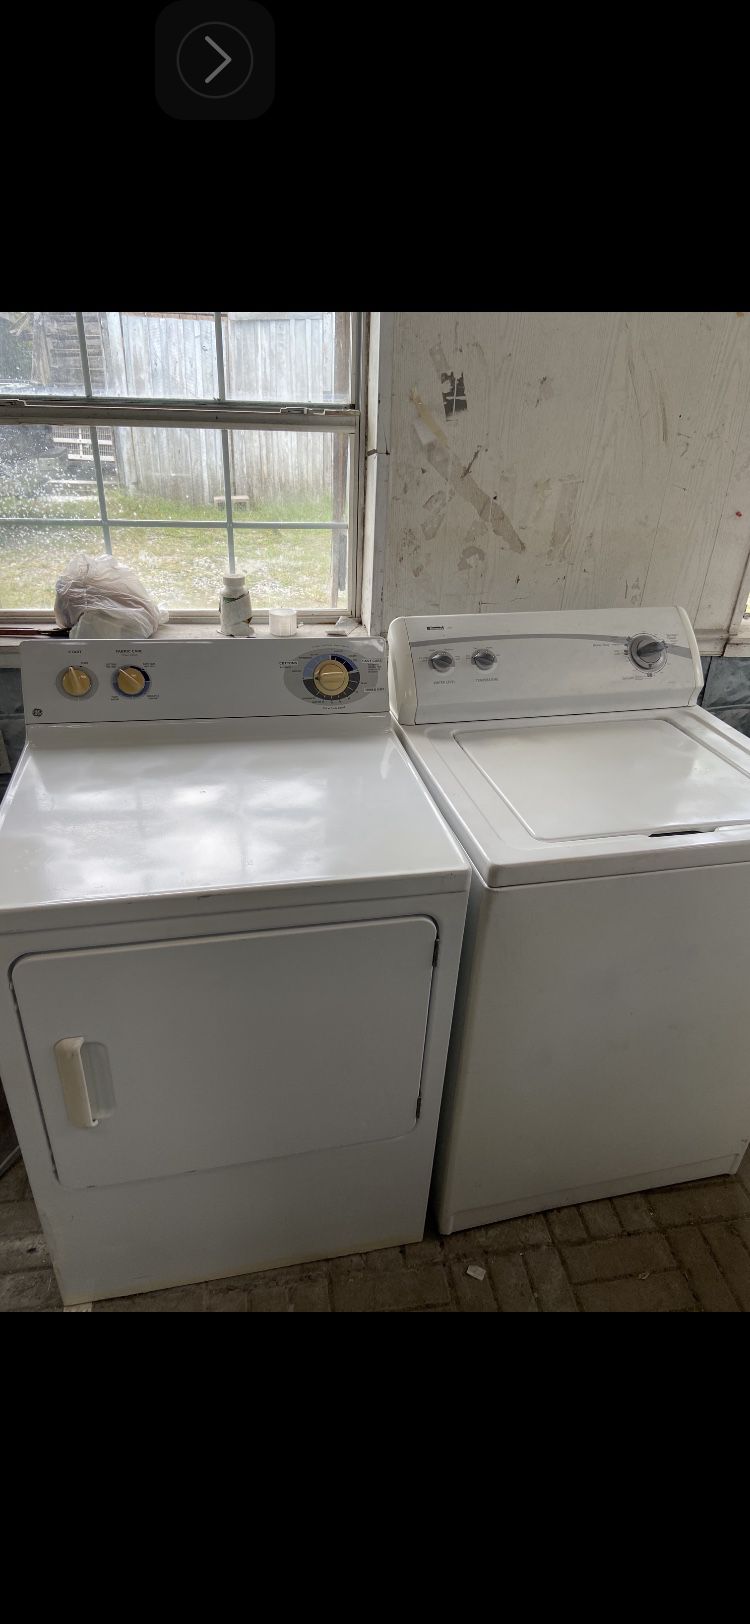 EXCELLENT RUNNING SUPER CAPACITY KENMORE WASHER & ELECTRIC SUPER CAPACITY DRYER SET ! ( I also have a gas dryer available) BOTH BEEN CLEANED  IN & OUT